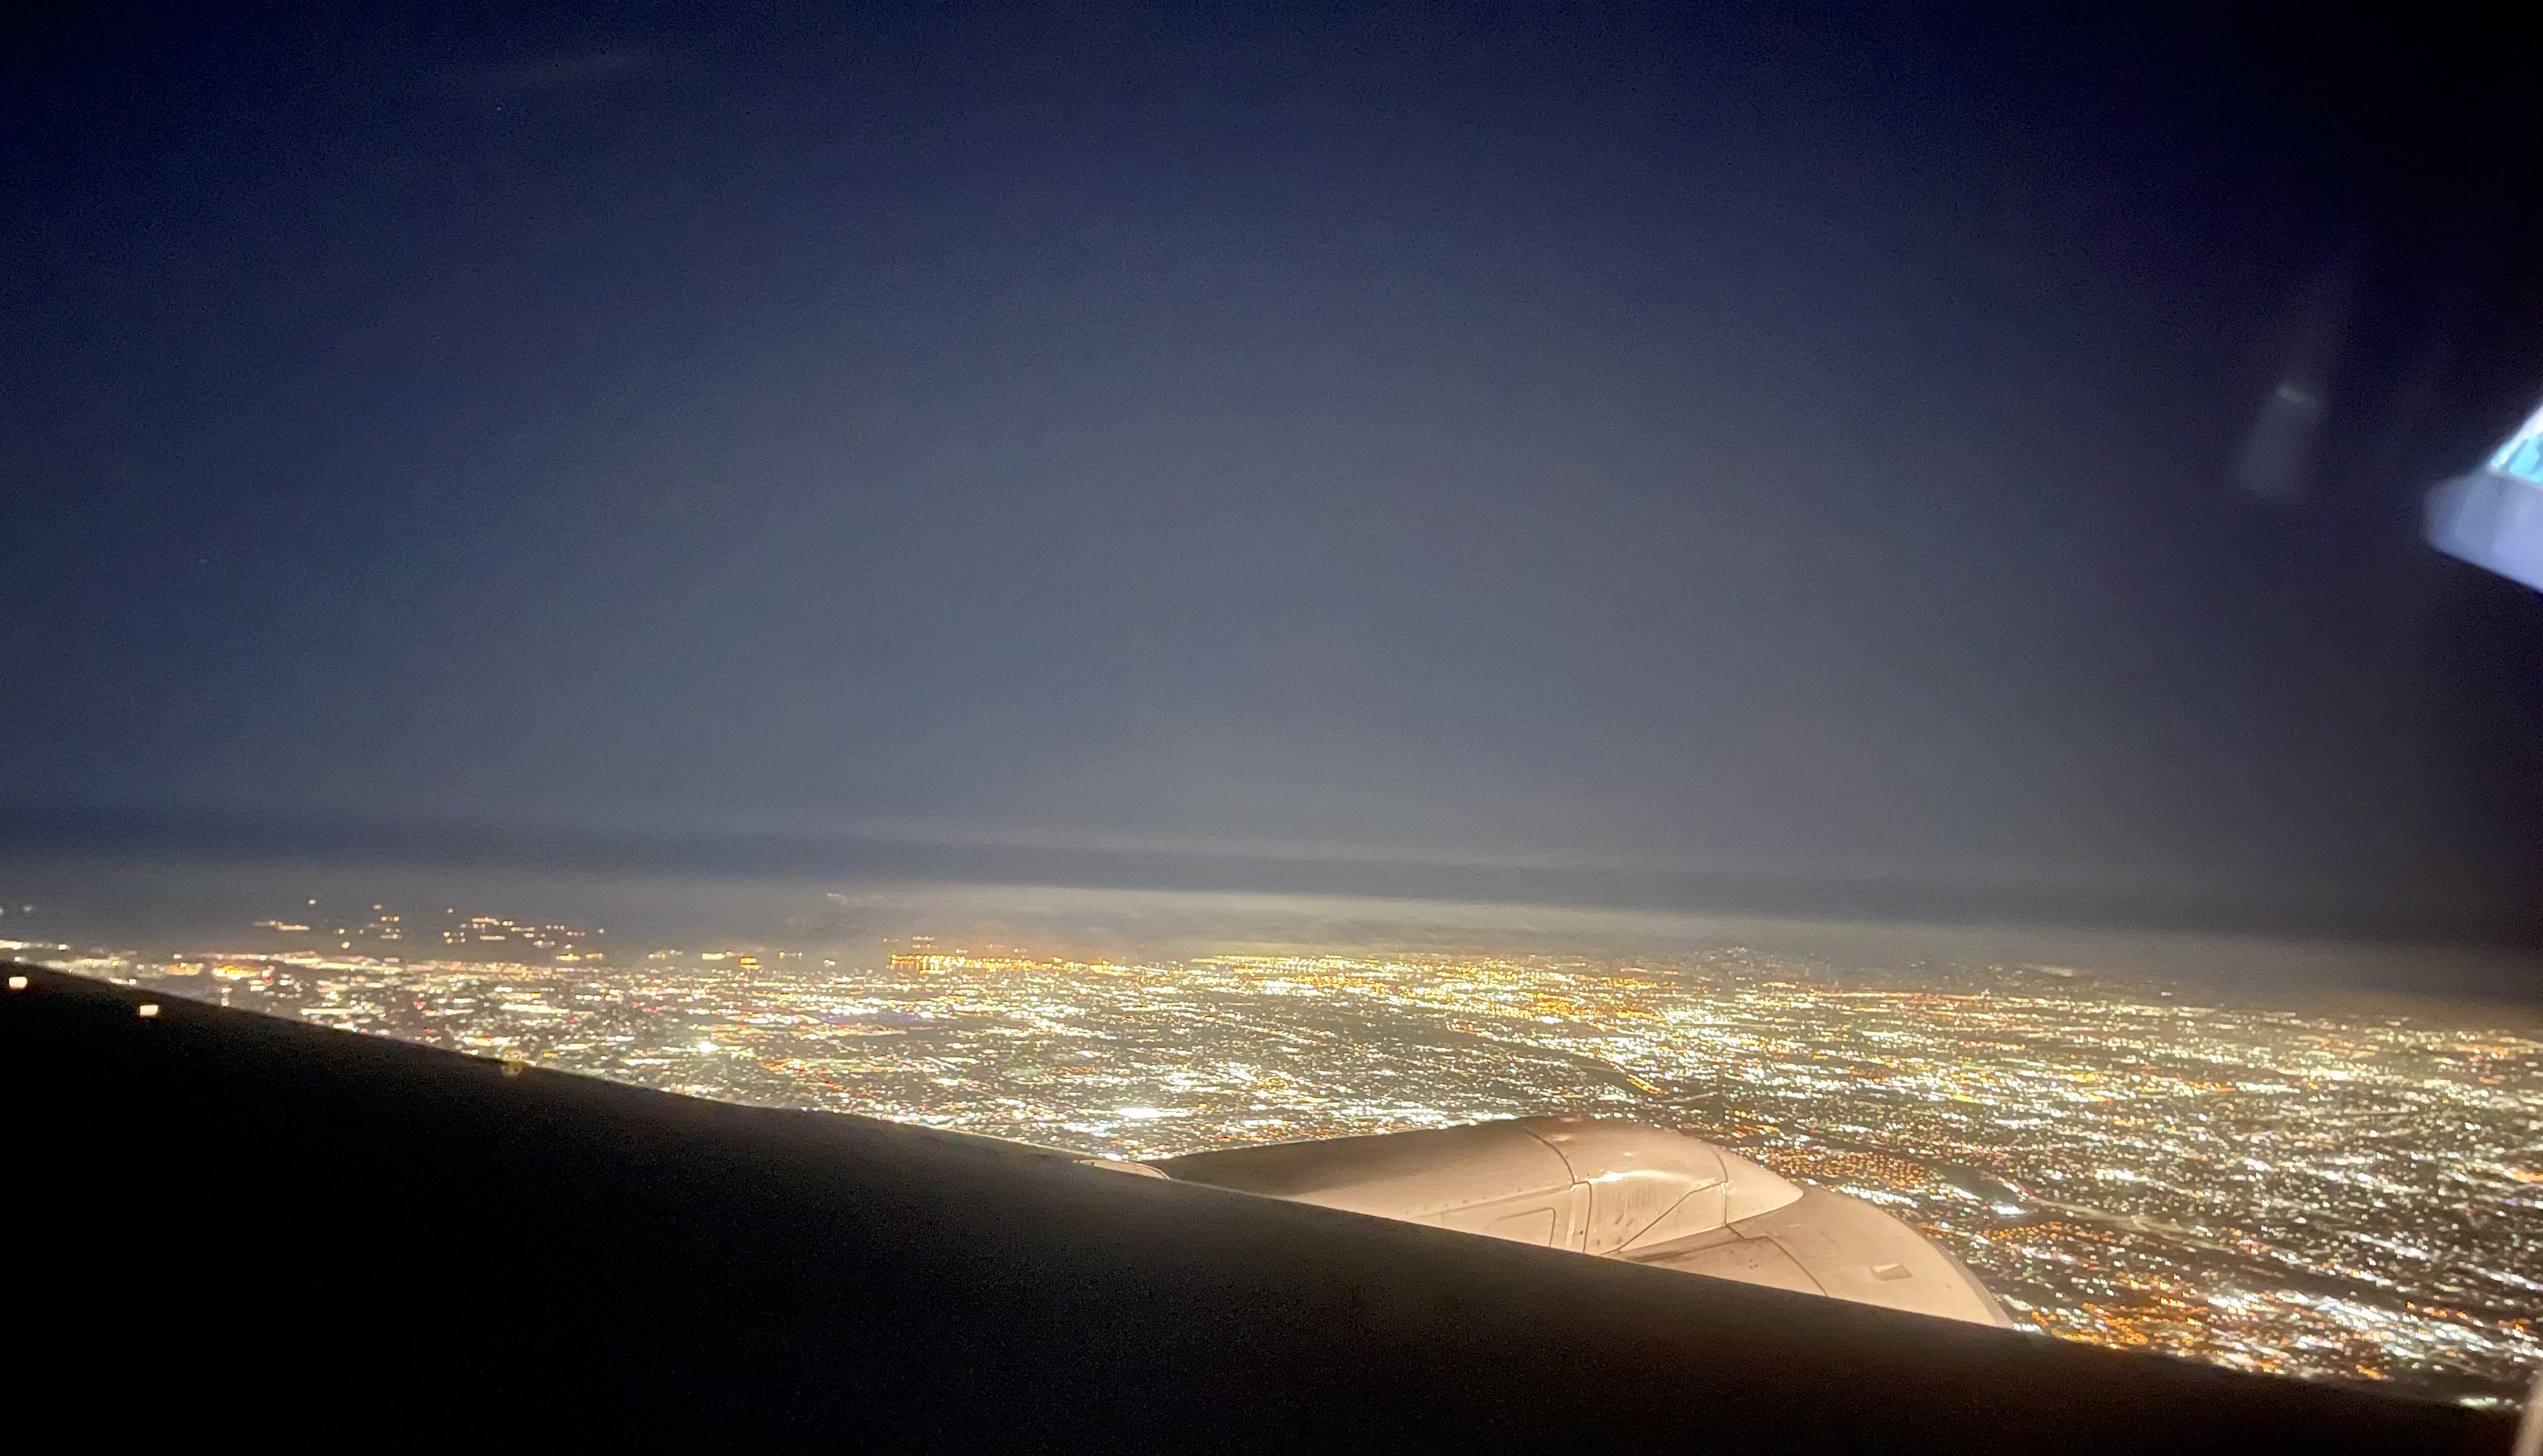 Los Angeles from above, at night